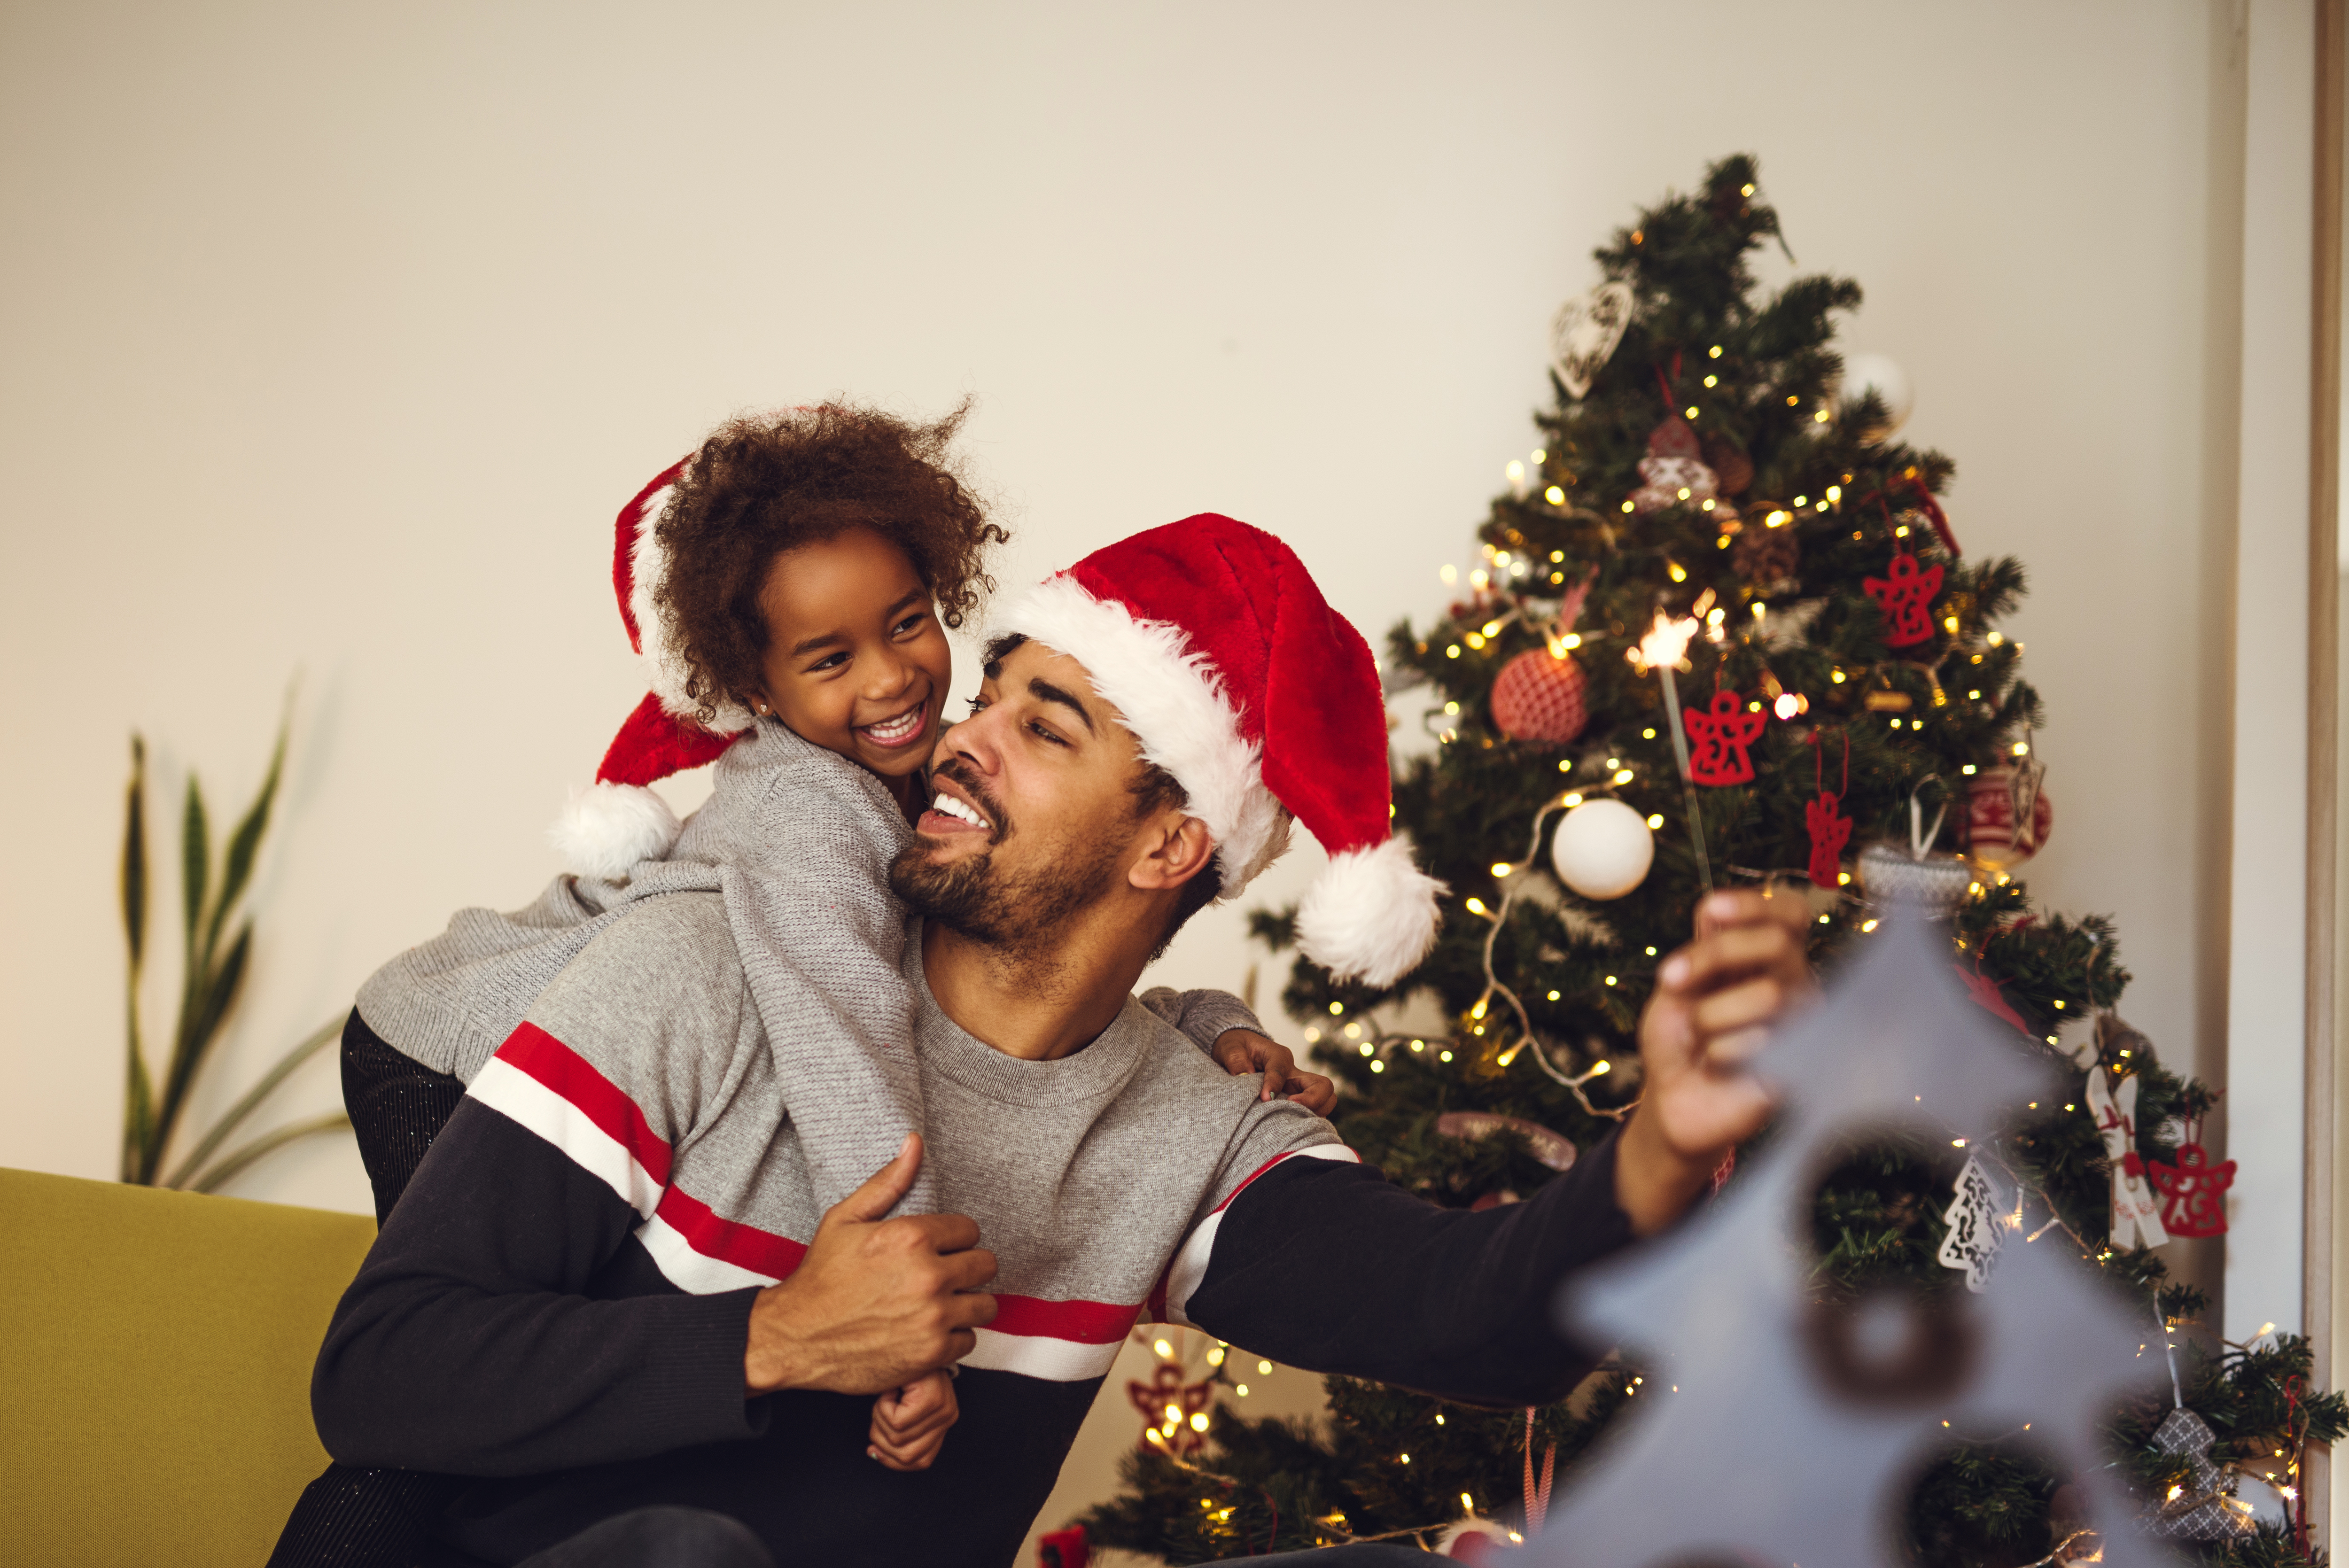 Man and child sitting together looking at one another smiling. Both are wearing Santa hats. Background features a Christmas tree decorated with ornaments.